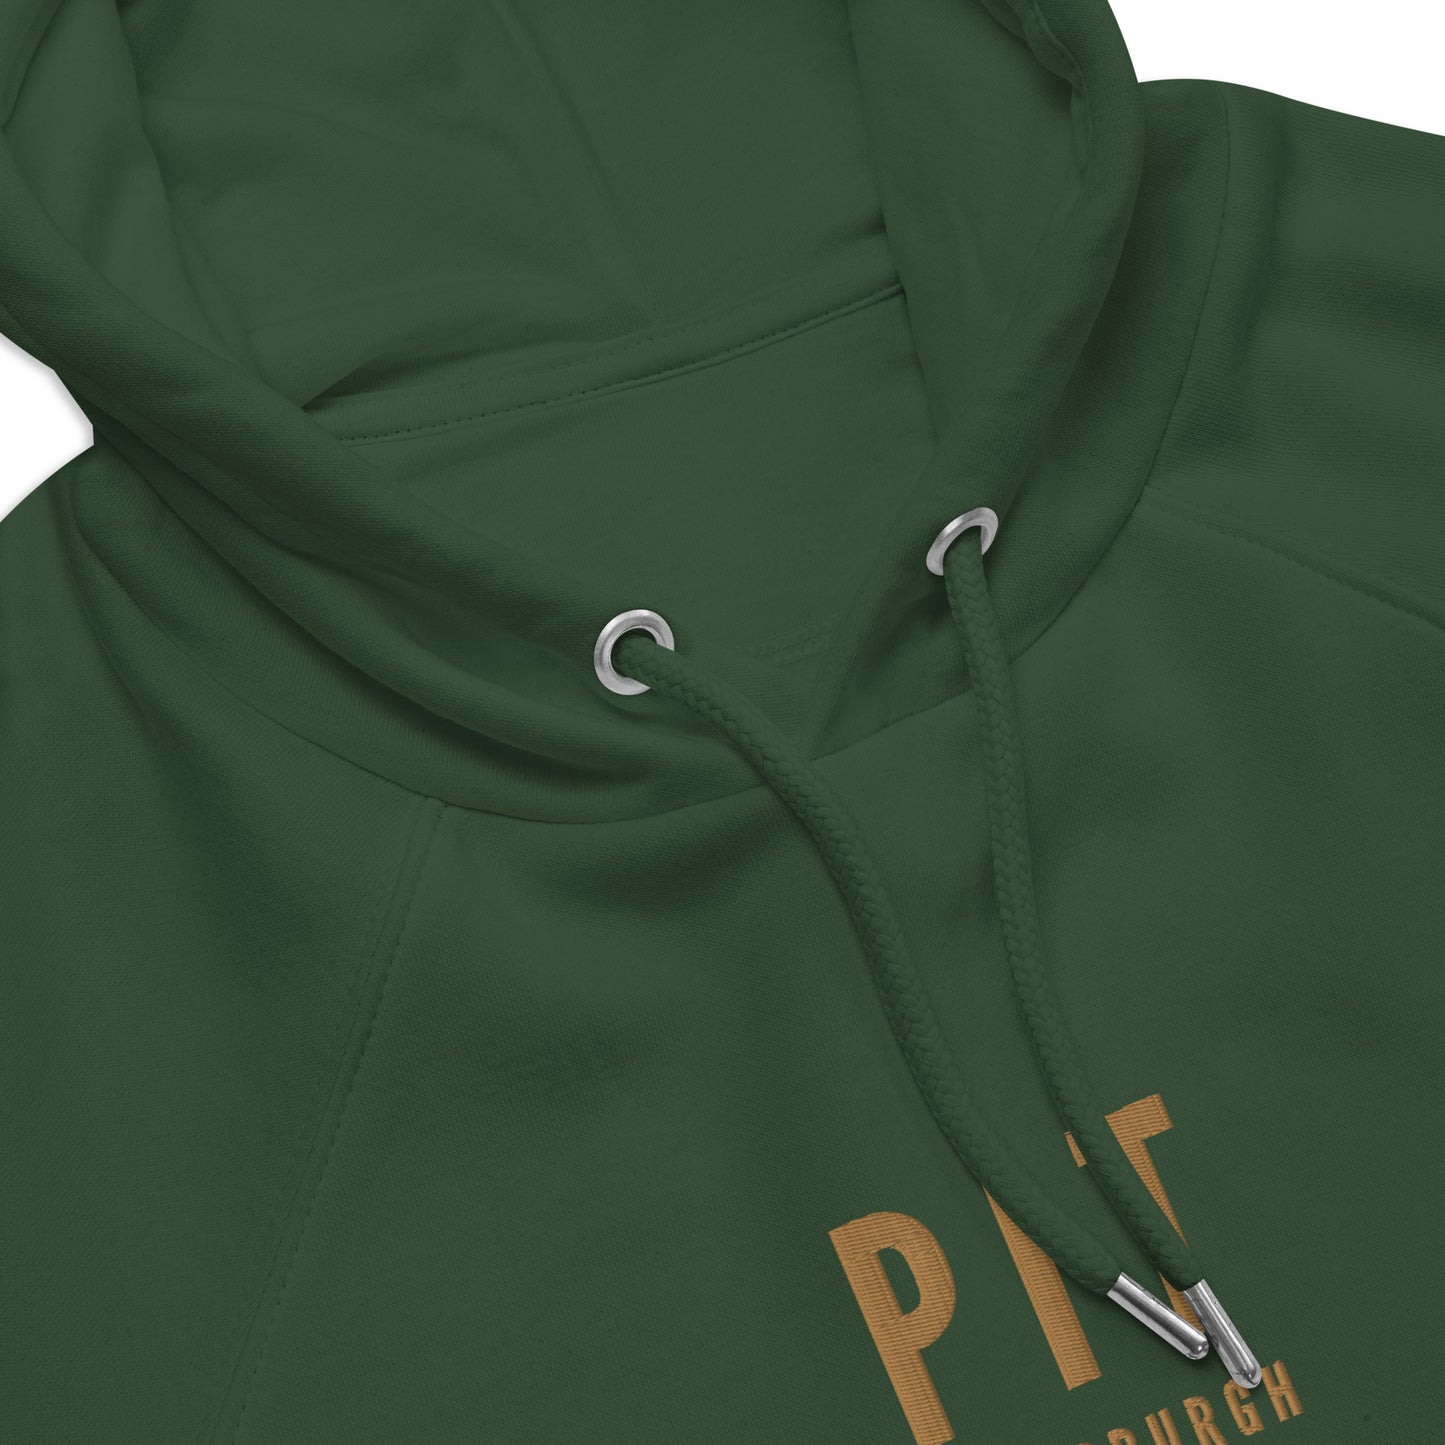 City Organic Hoodie - Old Gold • PIT Pittsburgh • YHM Designs - Image 07